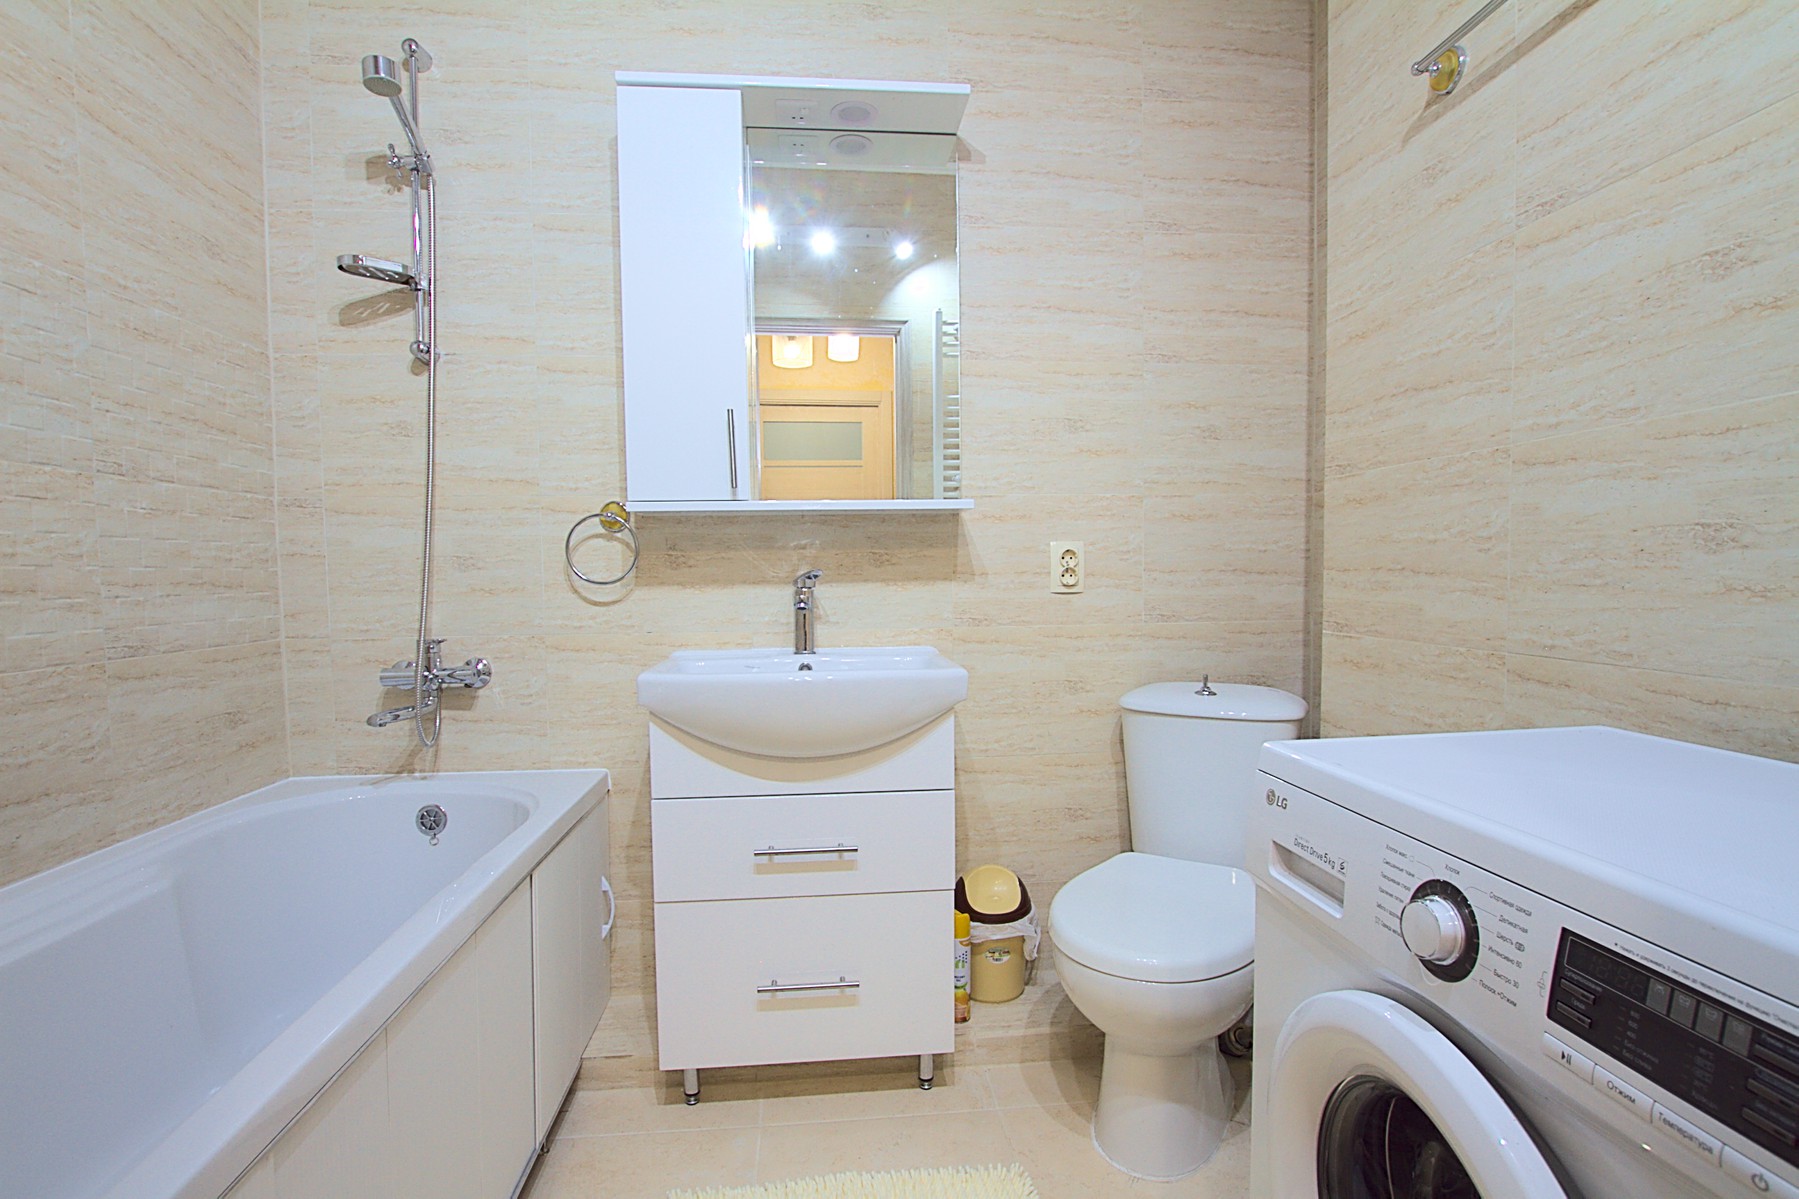 Uptown Studio Apartment is a 1 room apartment for rent in Chisinau, Moldova